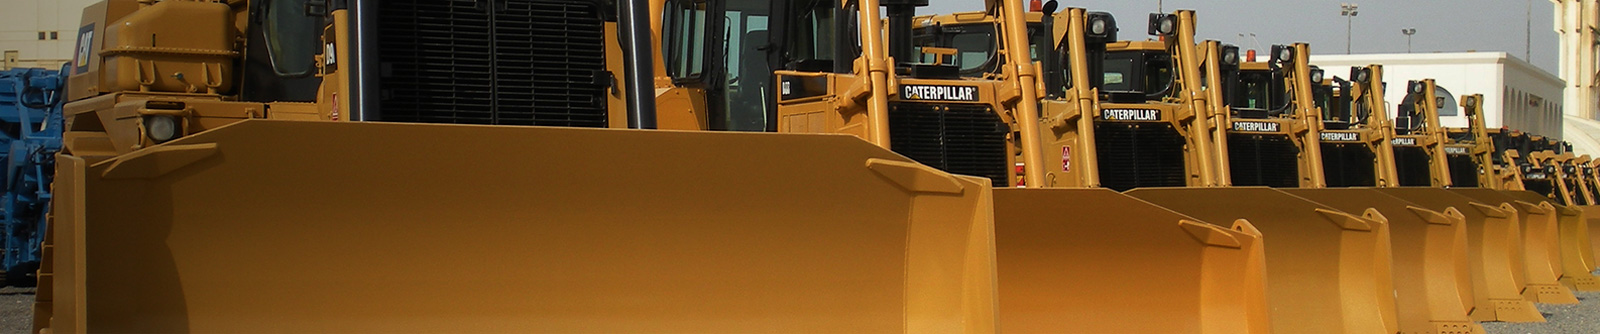 Second hand construction equipment for sale - Southwest Global